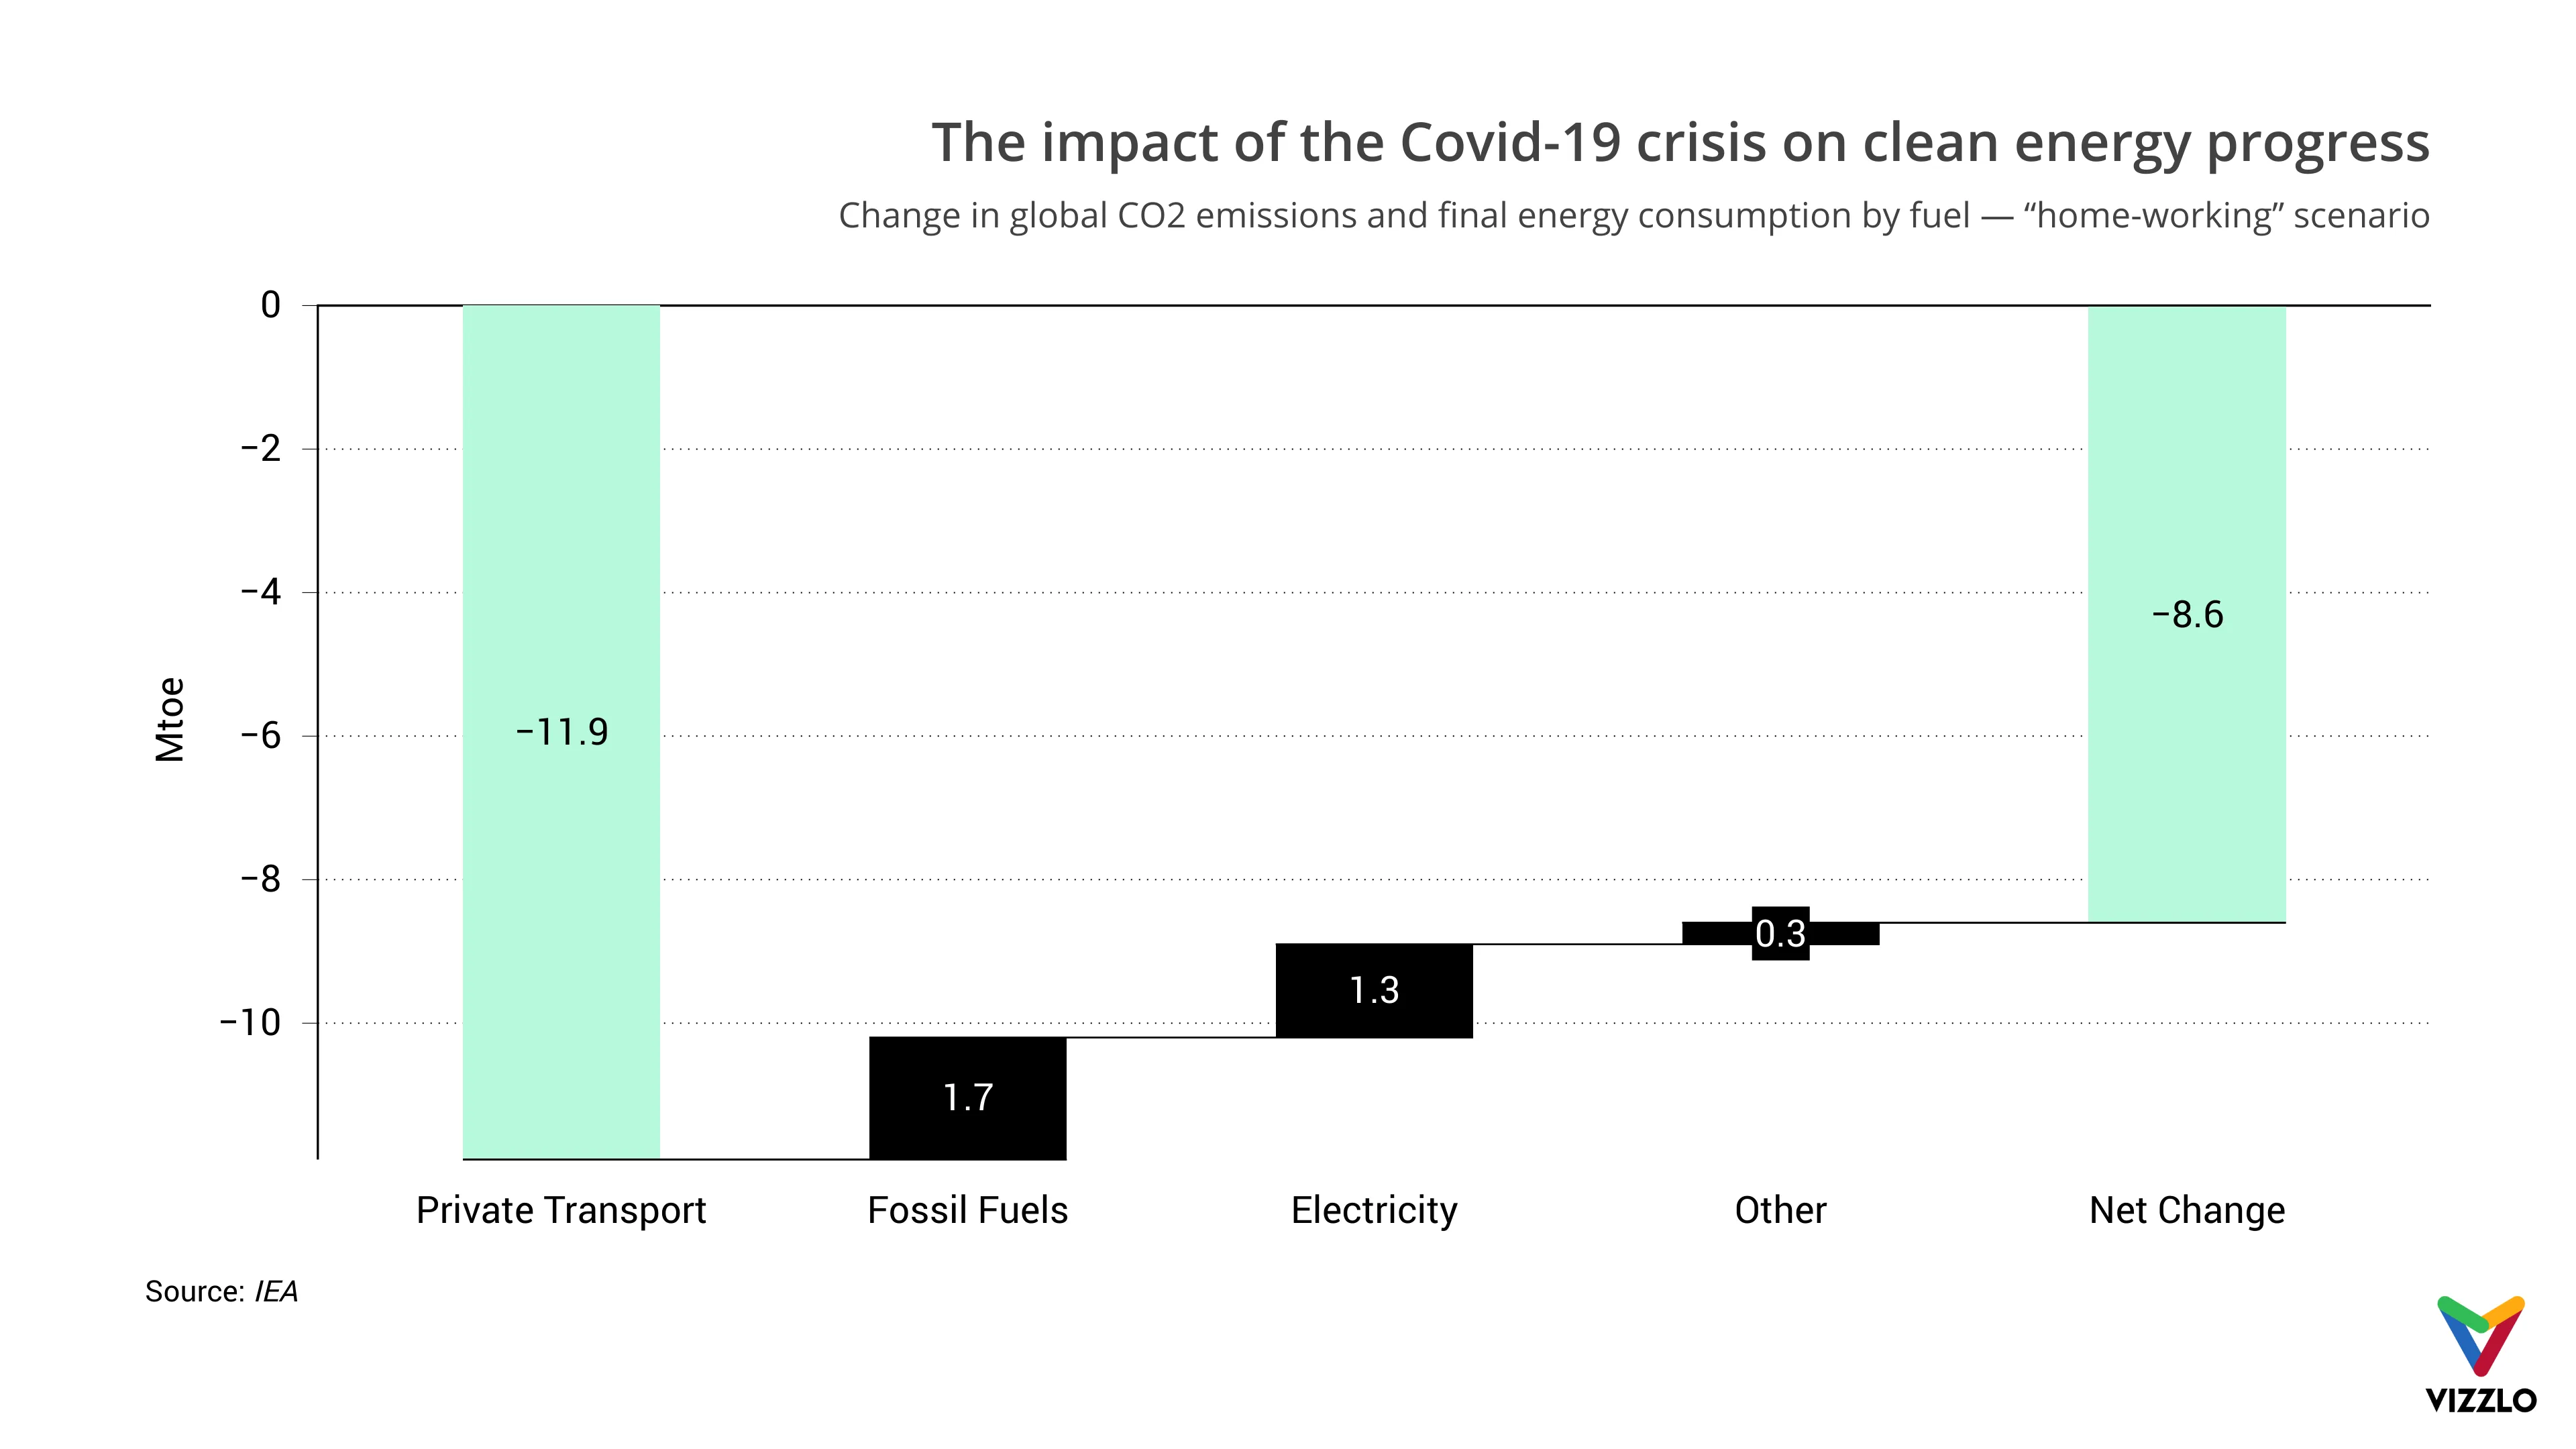 The impact of the Covid-19 crisis on clean energy progress